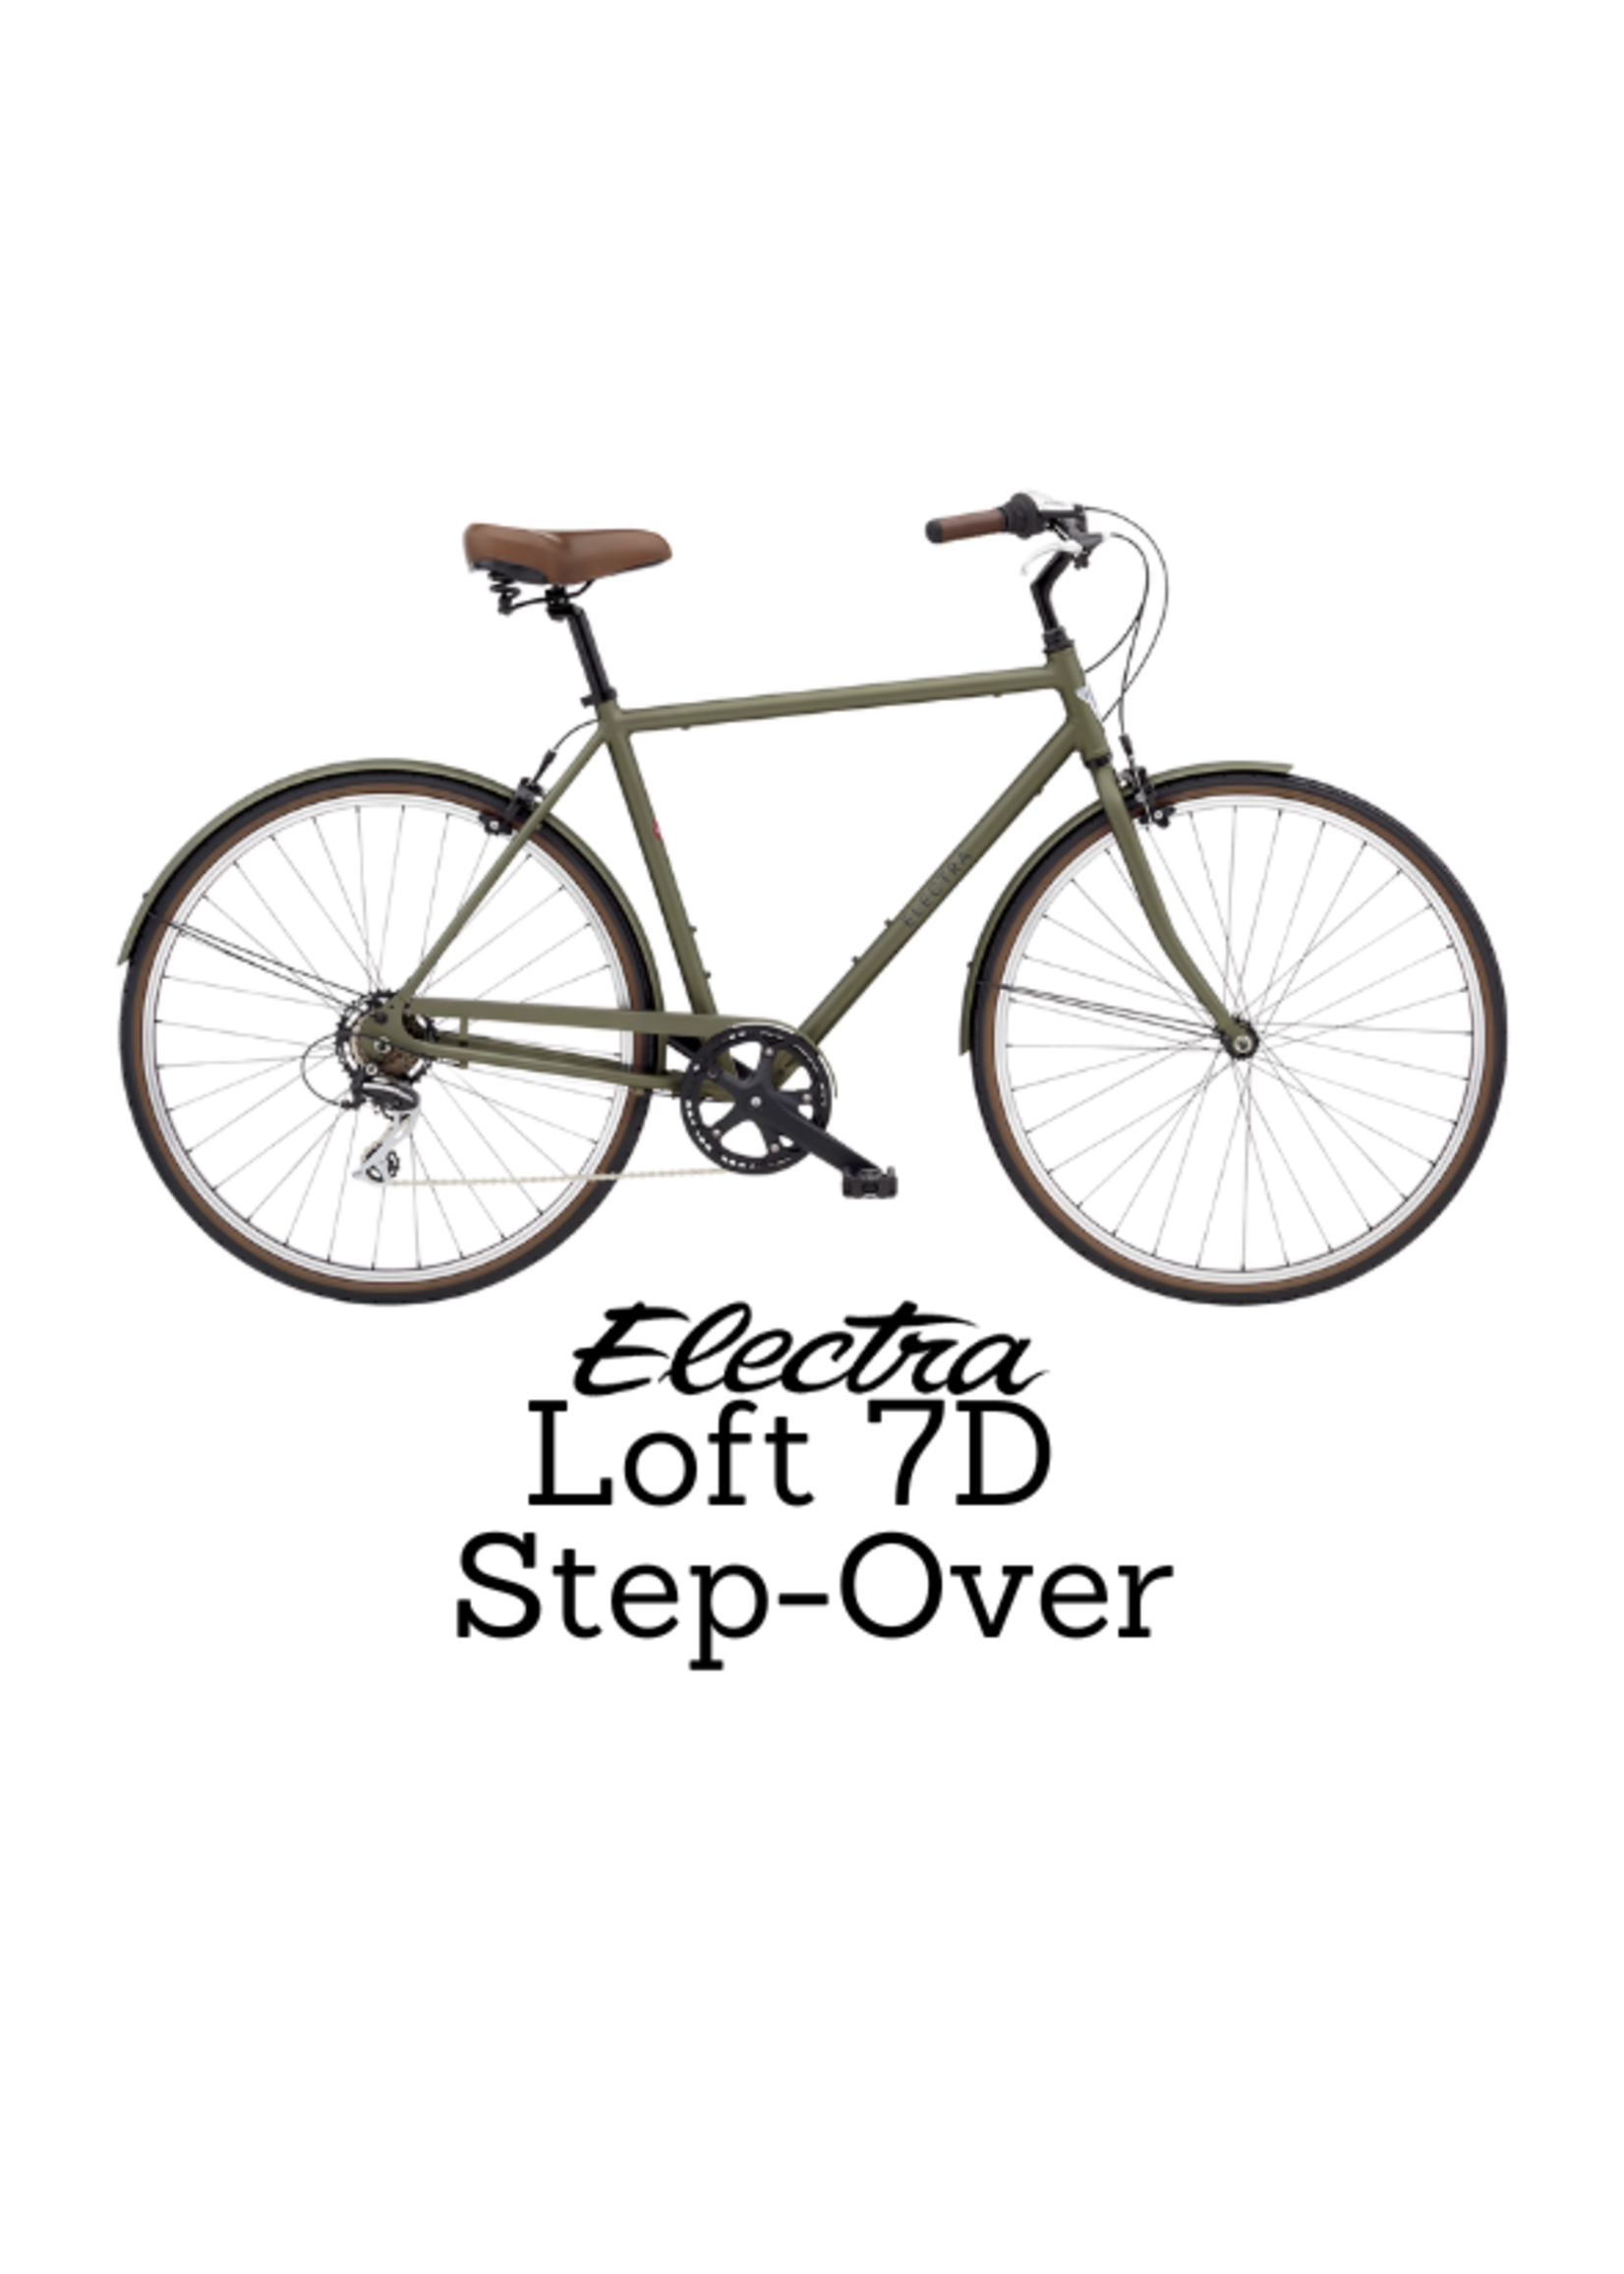 Electra Bicycle Company Electra Loft 7D Step-Over